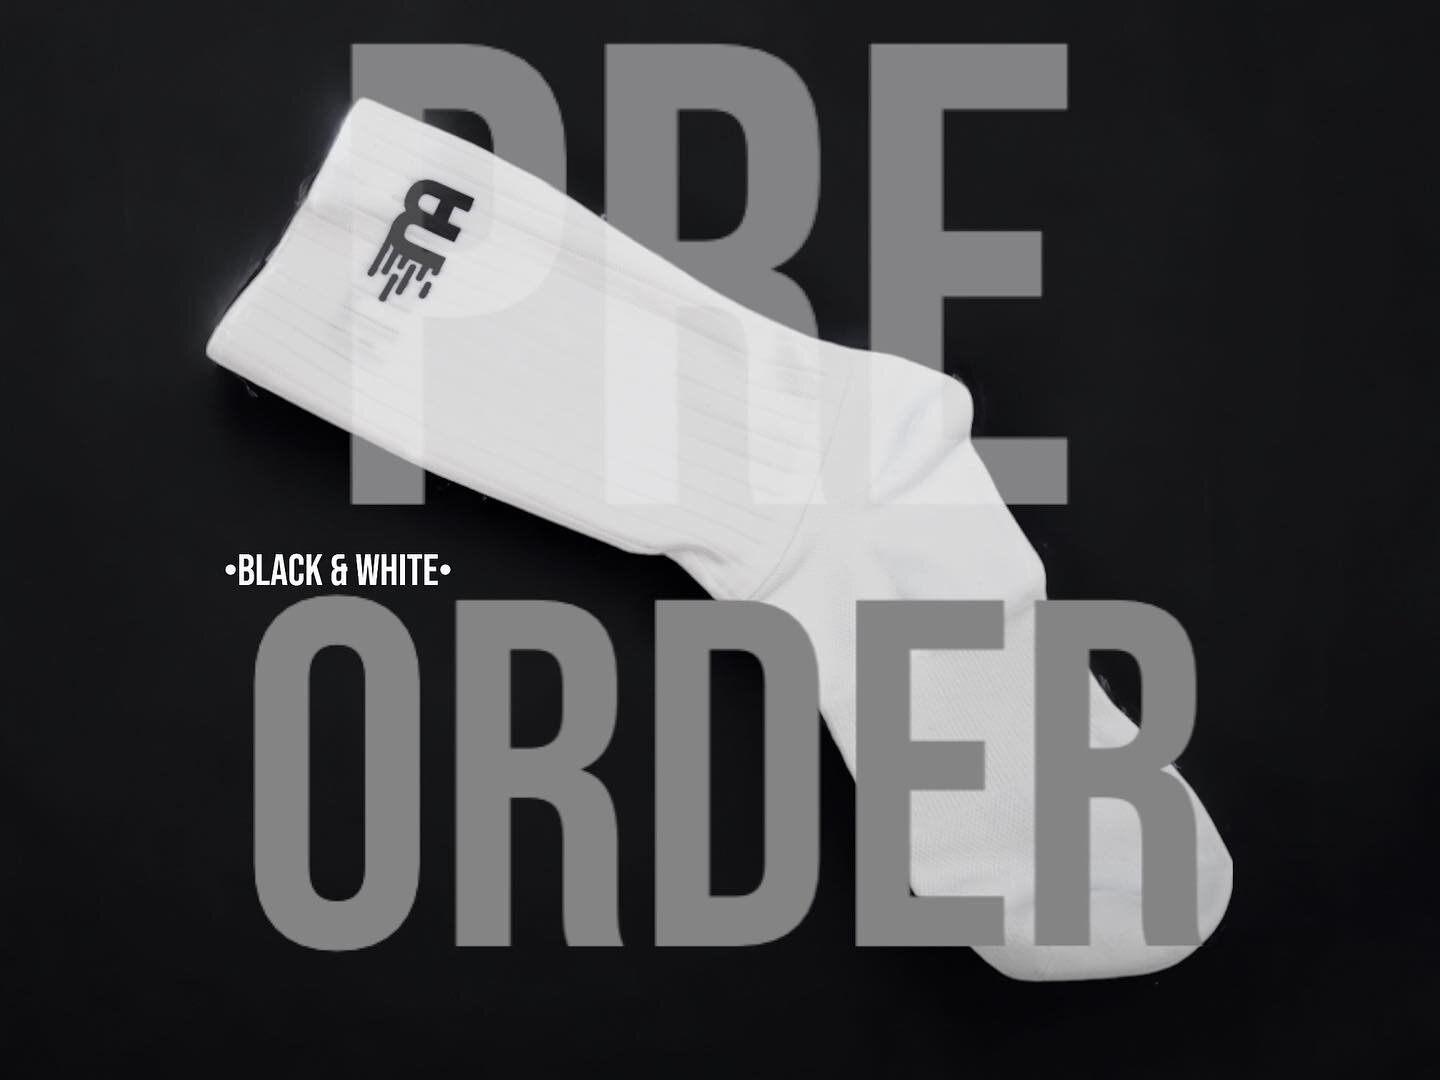 Our Pro Aero Socks are back!

Taking pre orders now, shipping on the 8th May

-Free Shipping
-Available in Black and White 

#getmoreaero